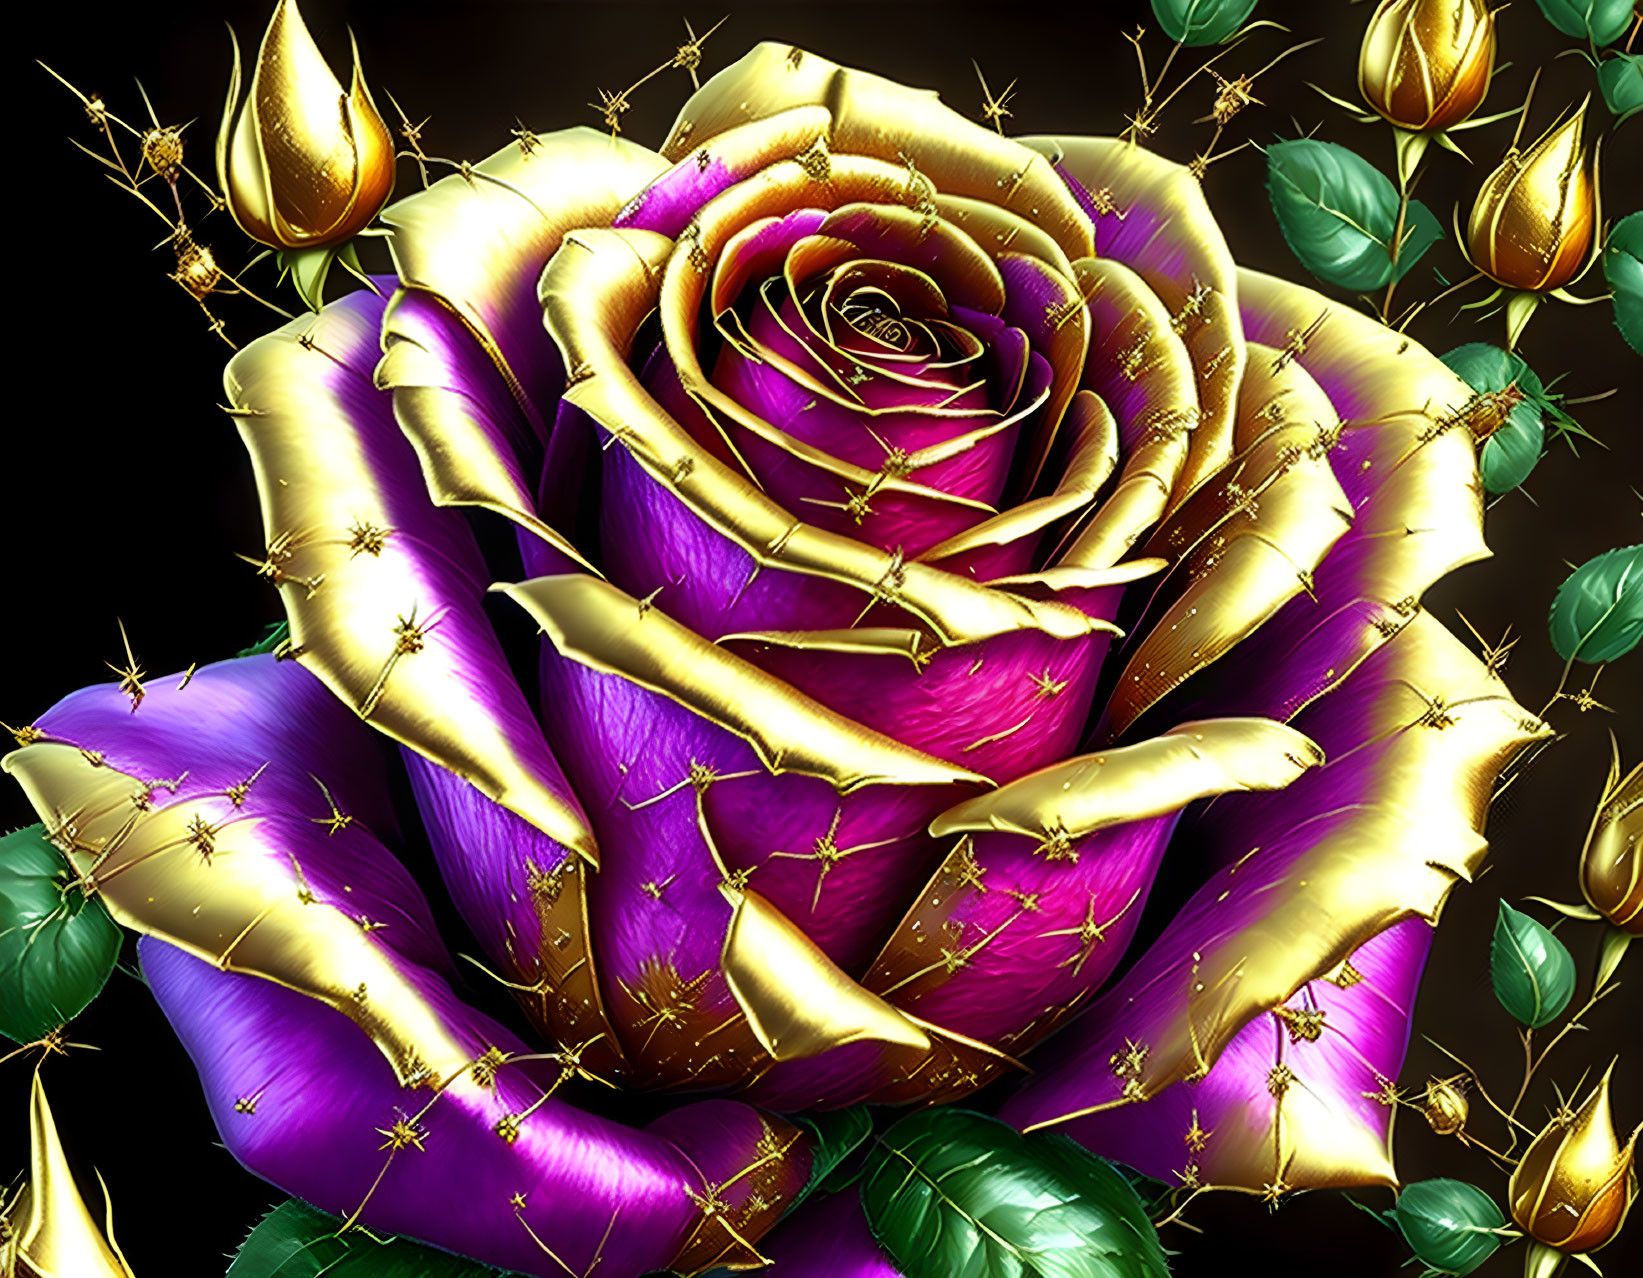 Purple and Gold Rose with Sparkling Accents on Dark Background